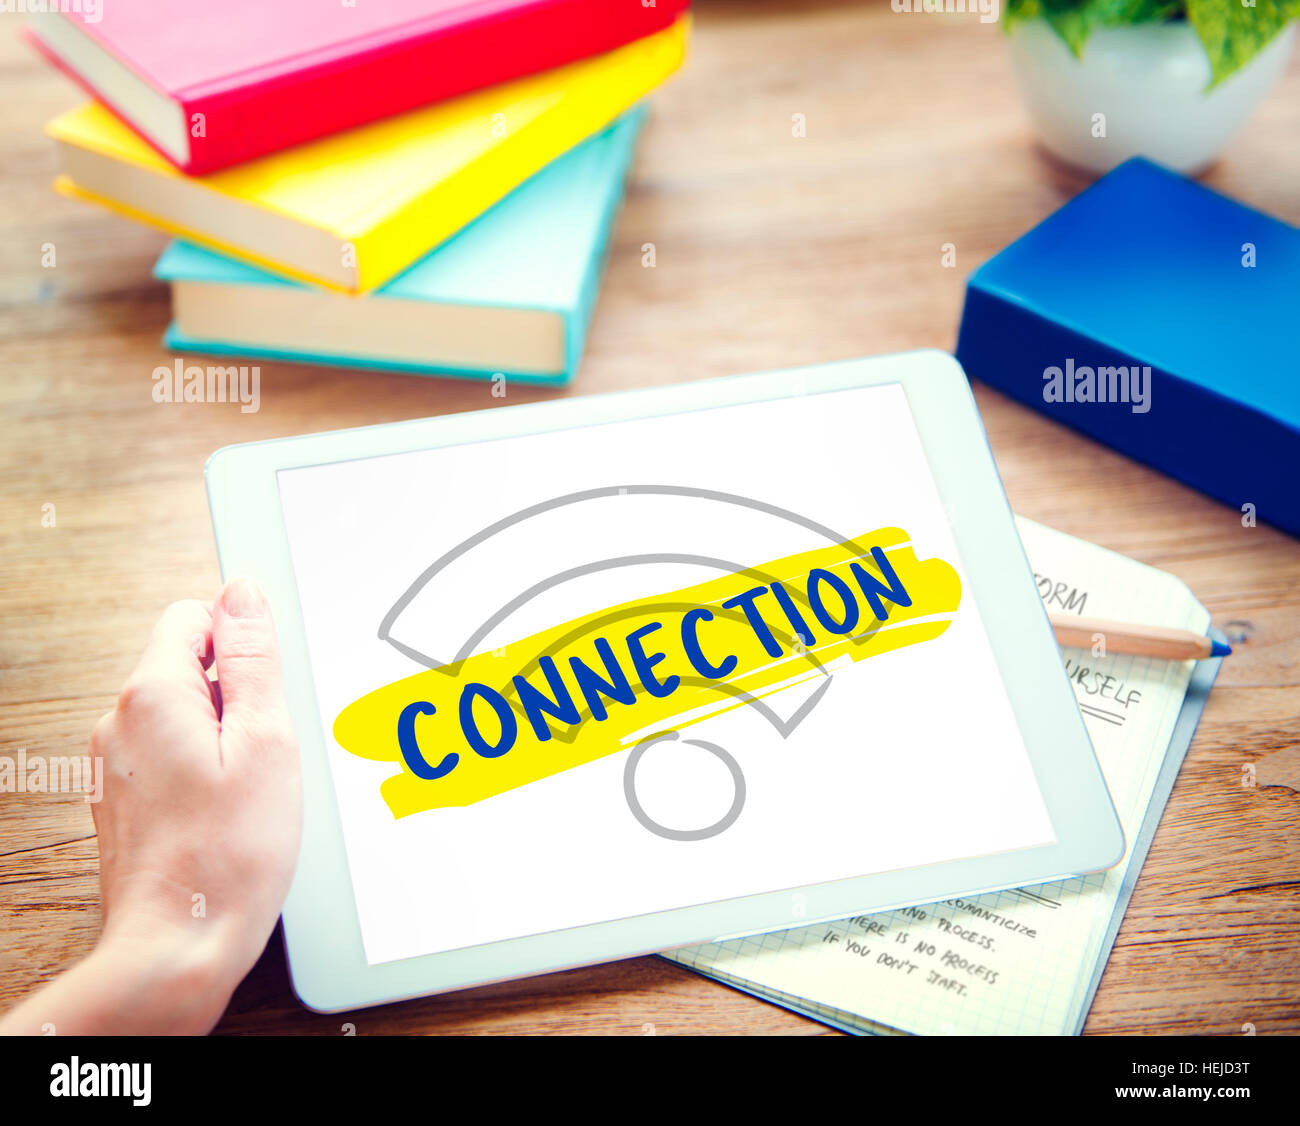 Digital Device Display Network Social Technology Concept Stock Photo